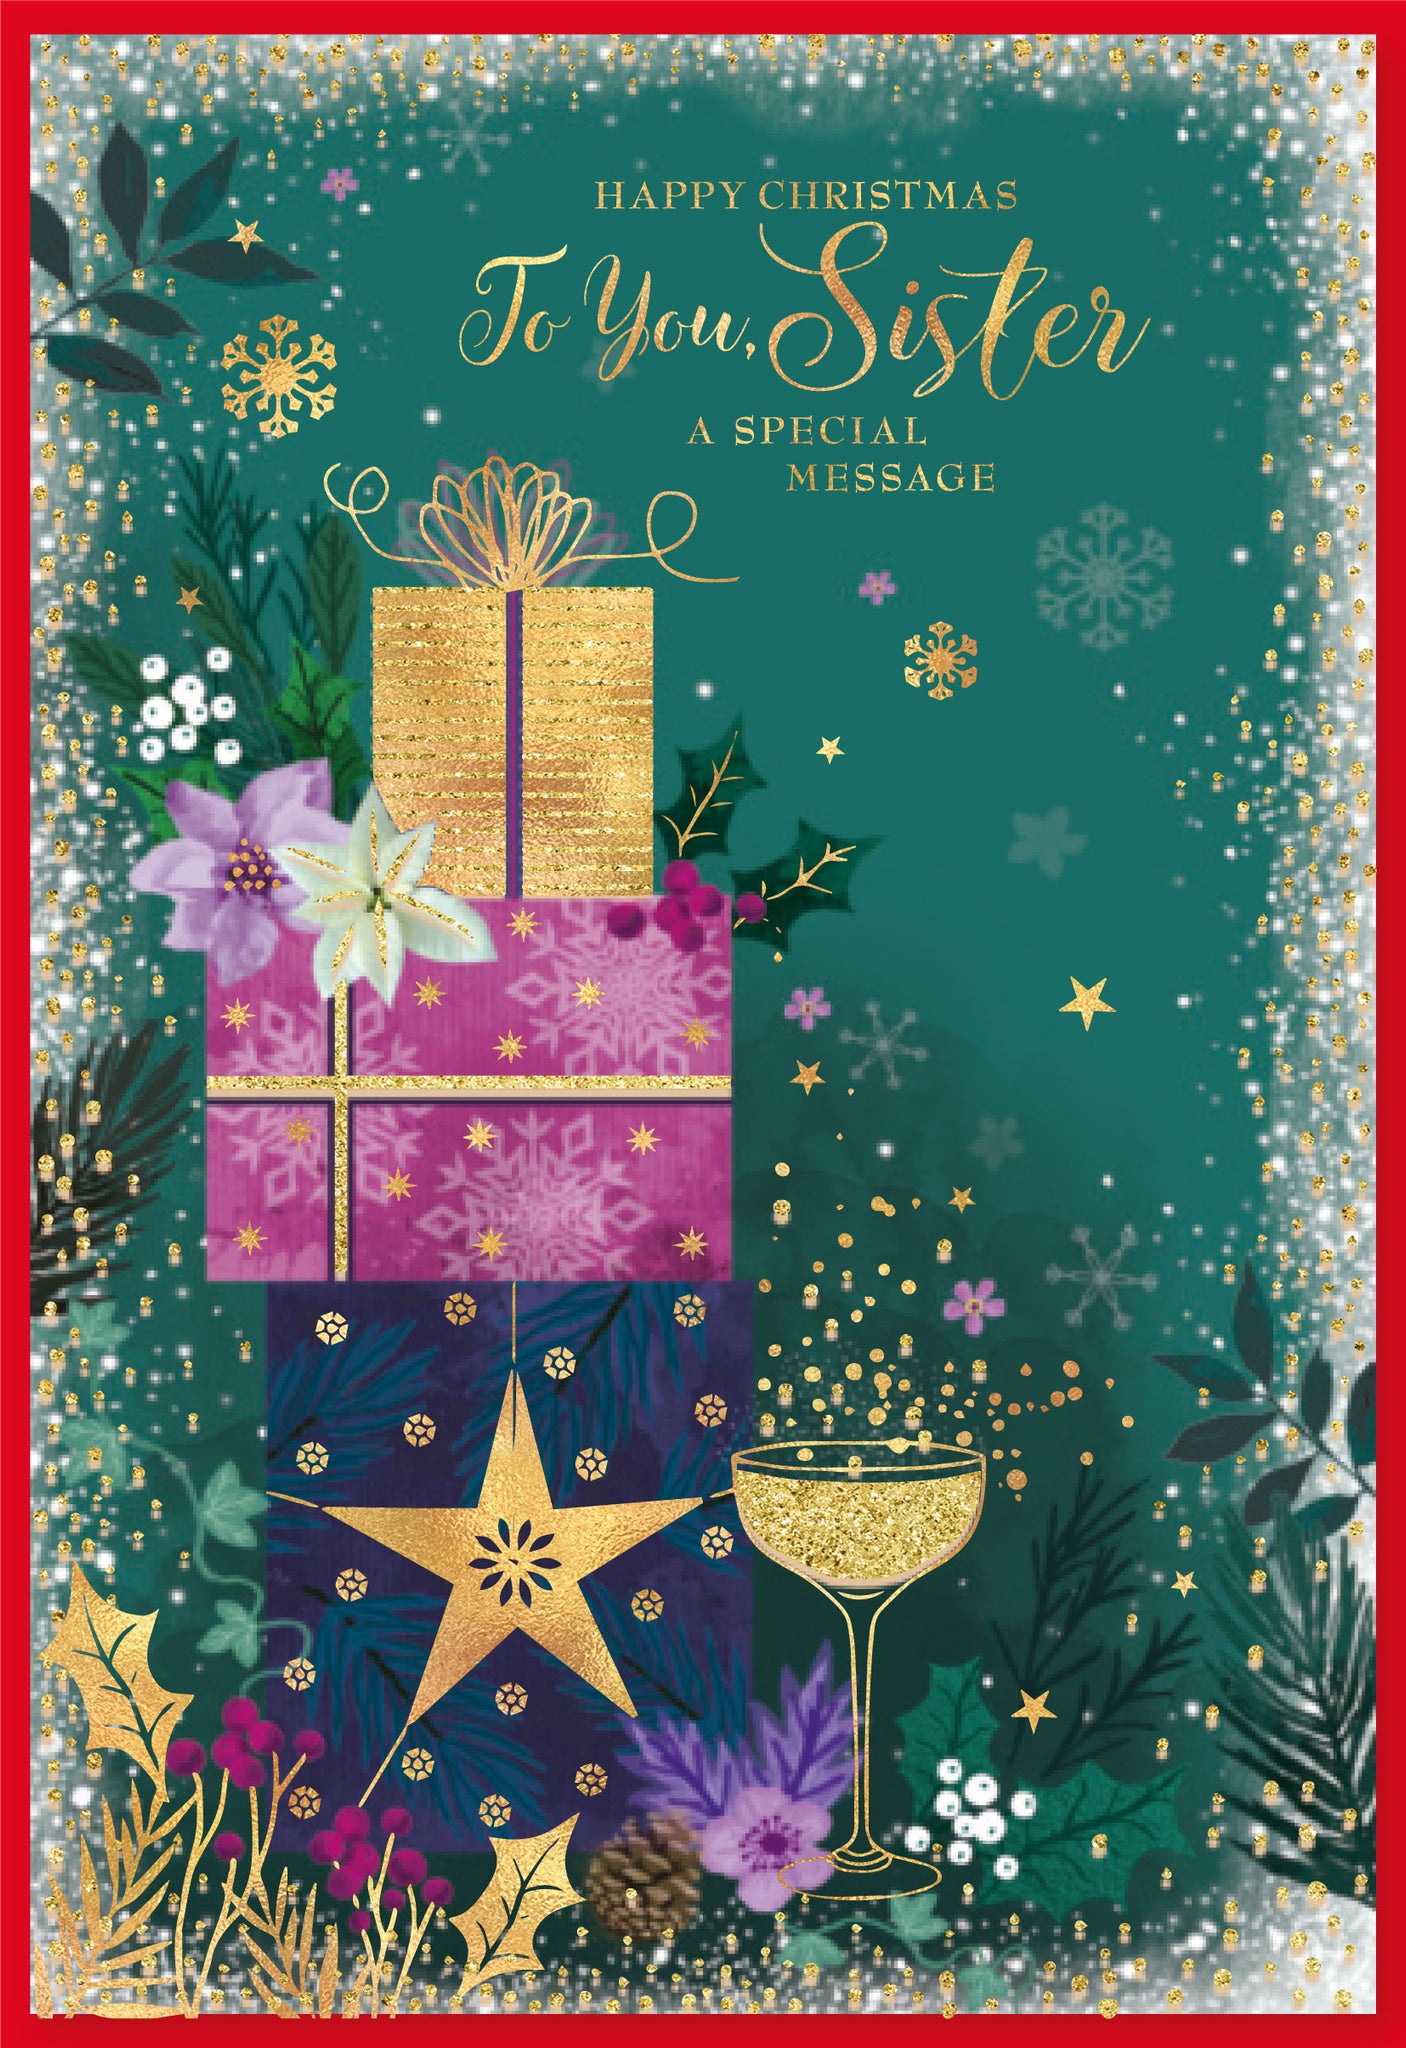 Sister Christmas card - xmas gifts and sparkling drink